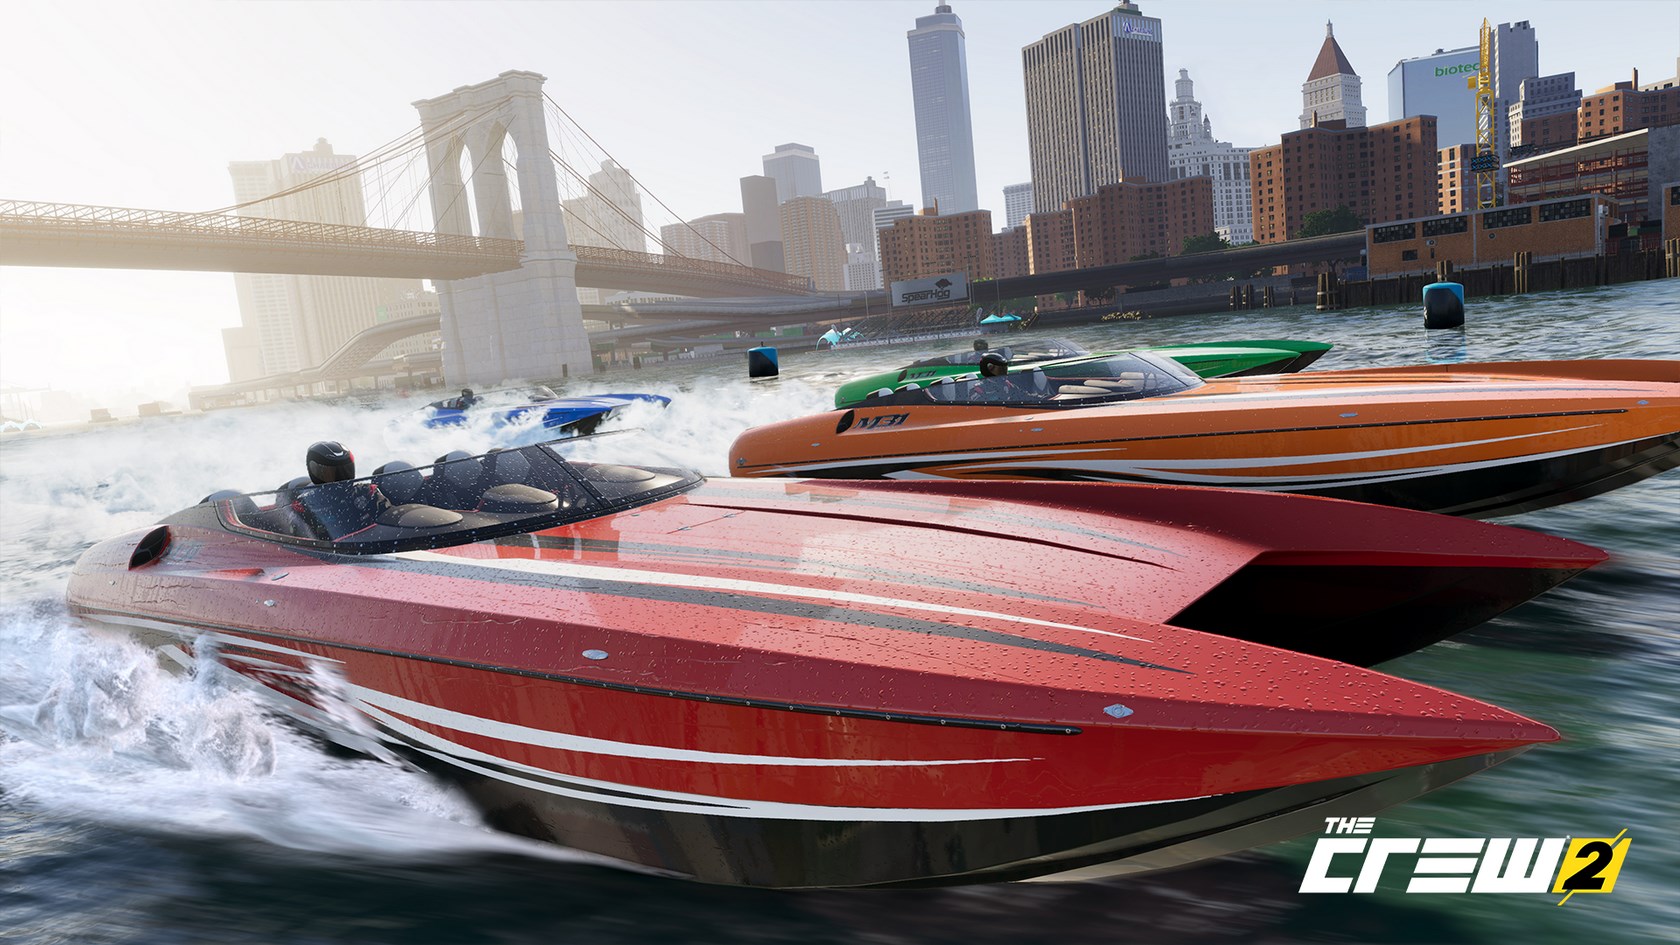 The Crew 2. Deluxe Edition (Uplay key) @ RU